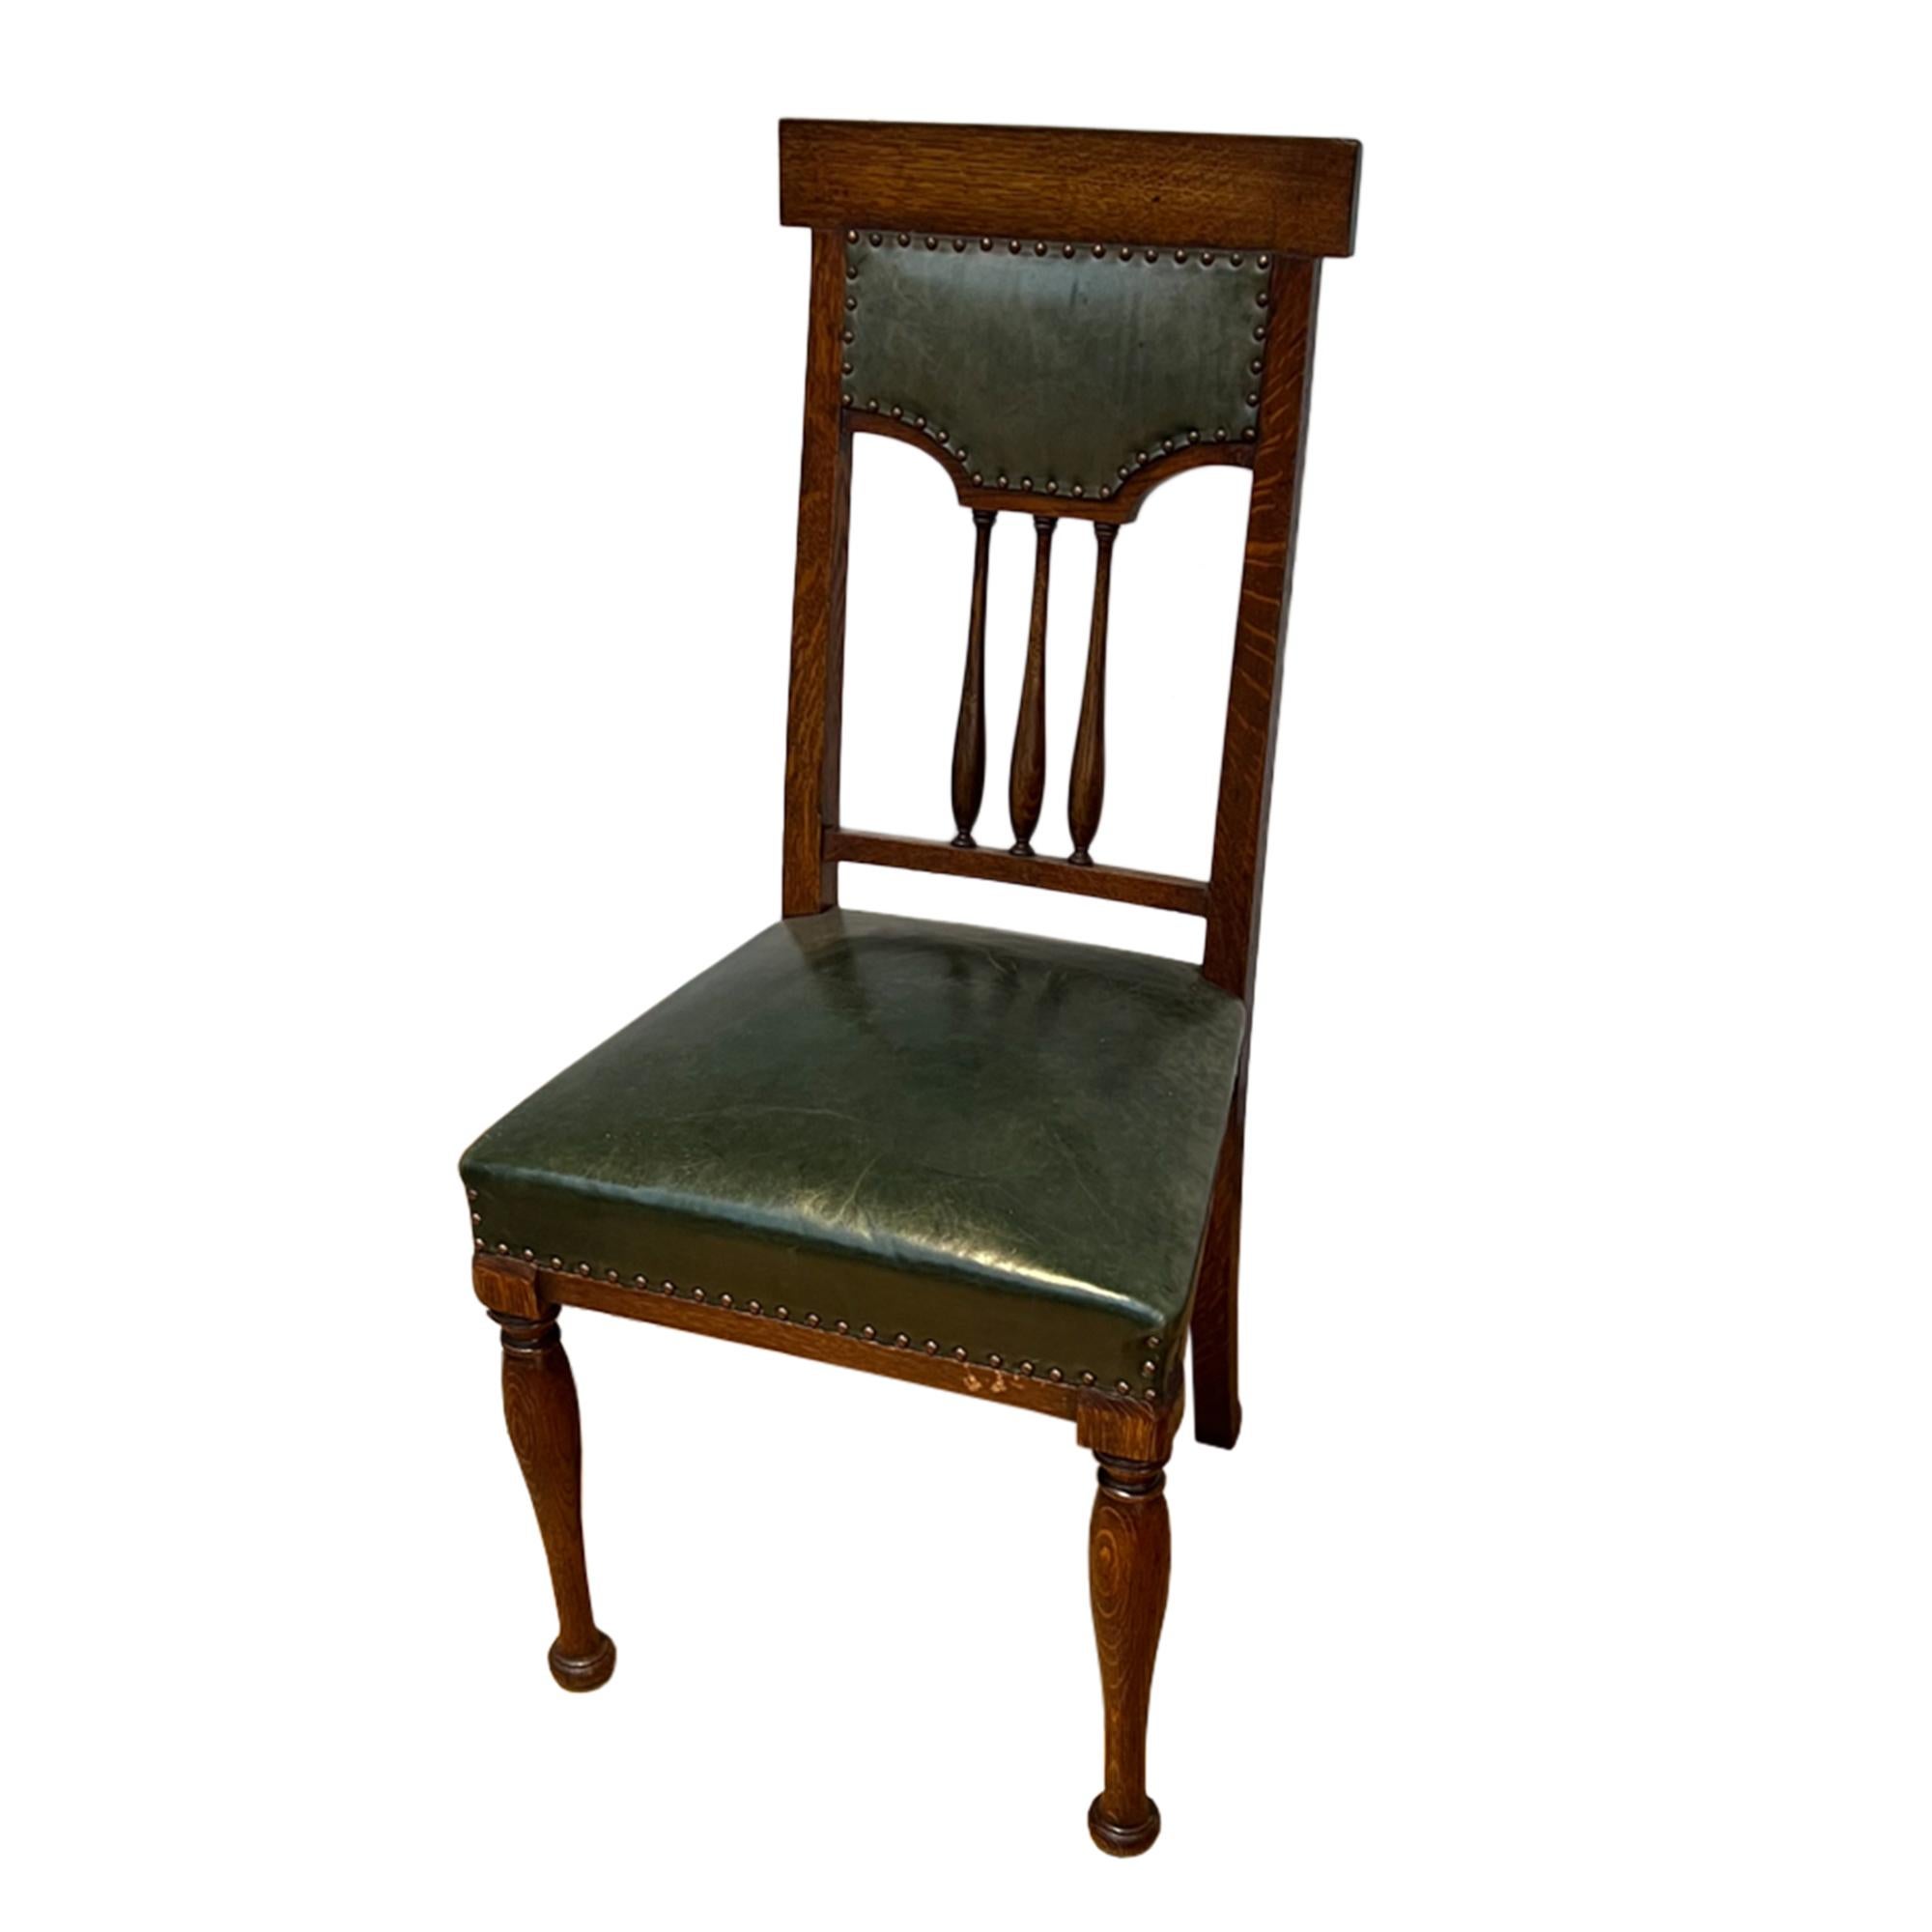 This lovely set of dining chairs are made from oak and leather with brass studs.

Made in the 1910s - a great example of British antiques in the Arts and Crafts style.